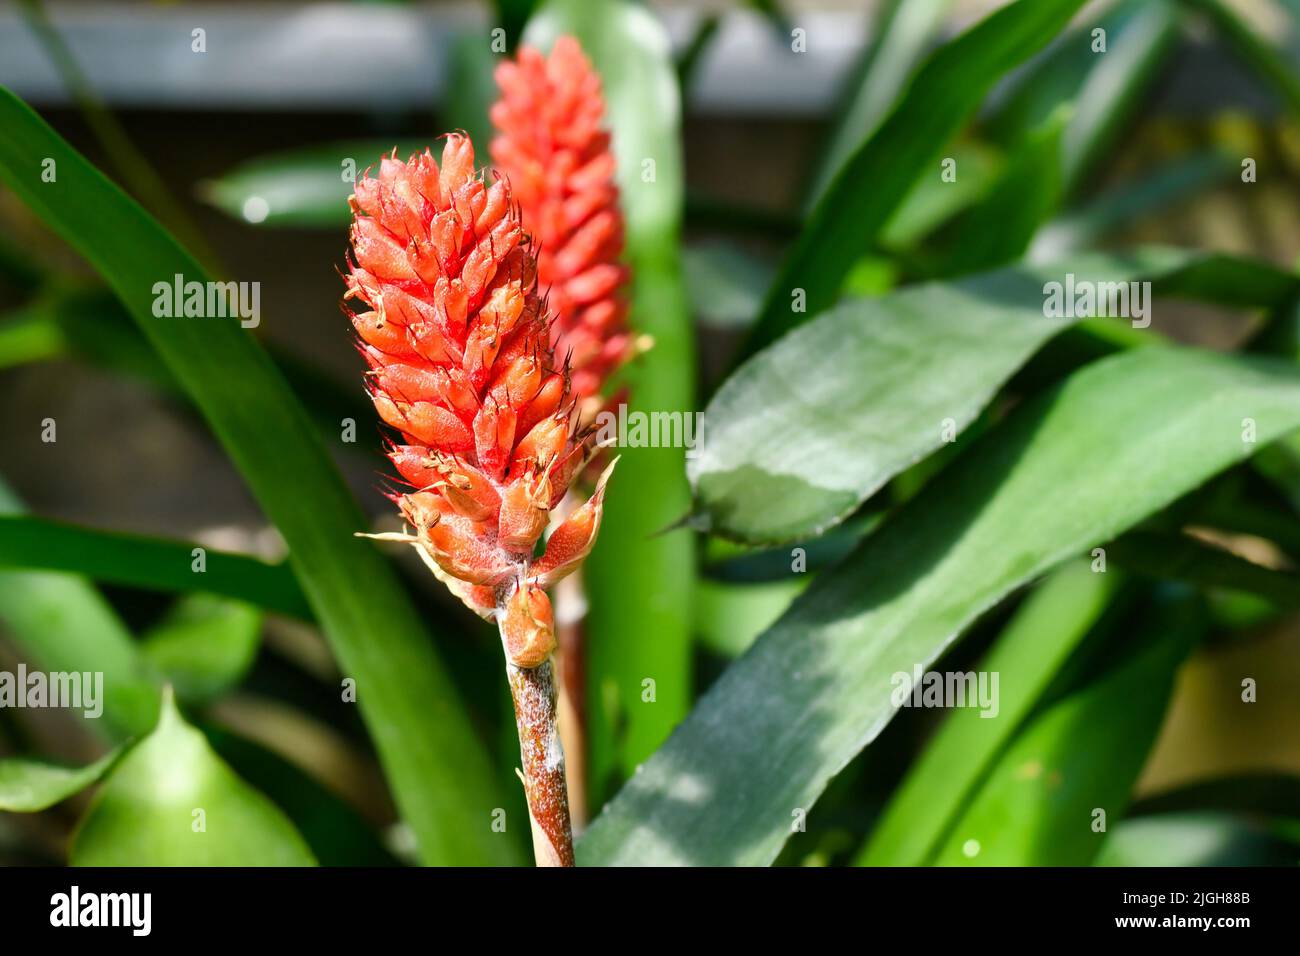 Bright red flower of 'Aechmea Cylindrata' plant Stock Photo